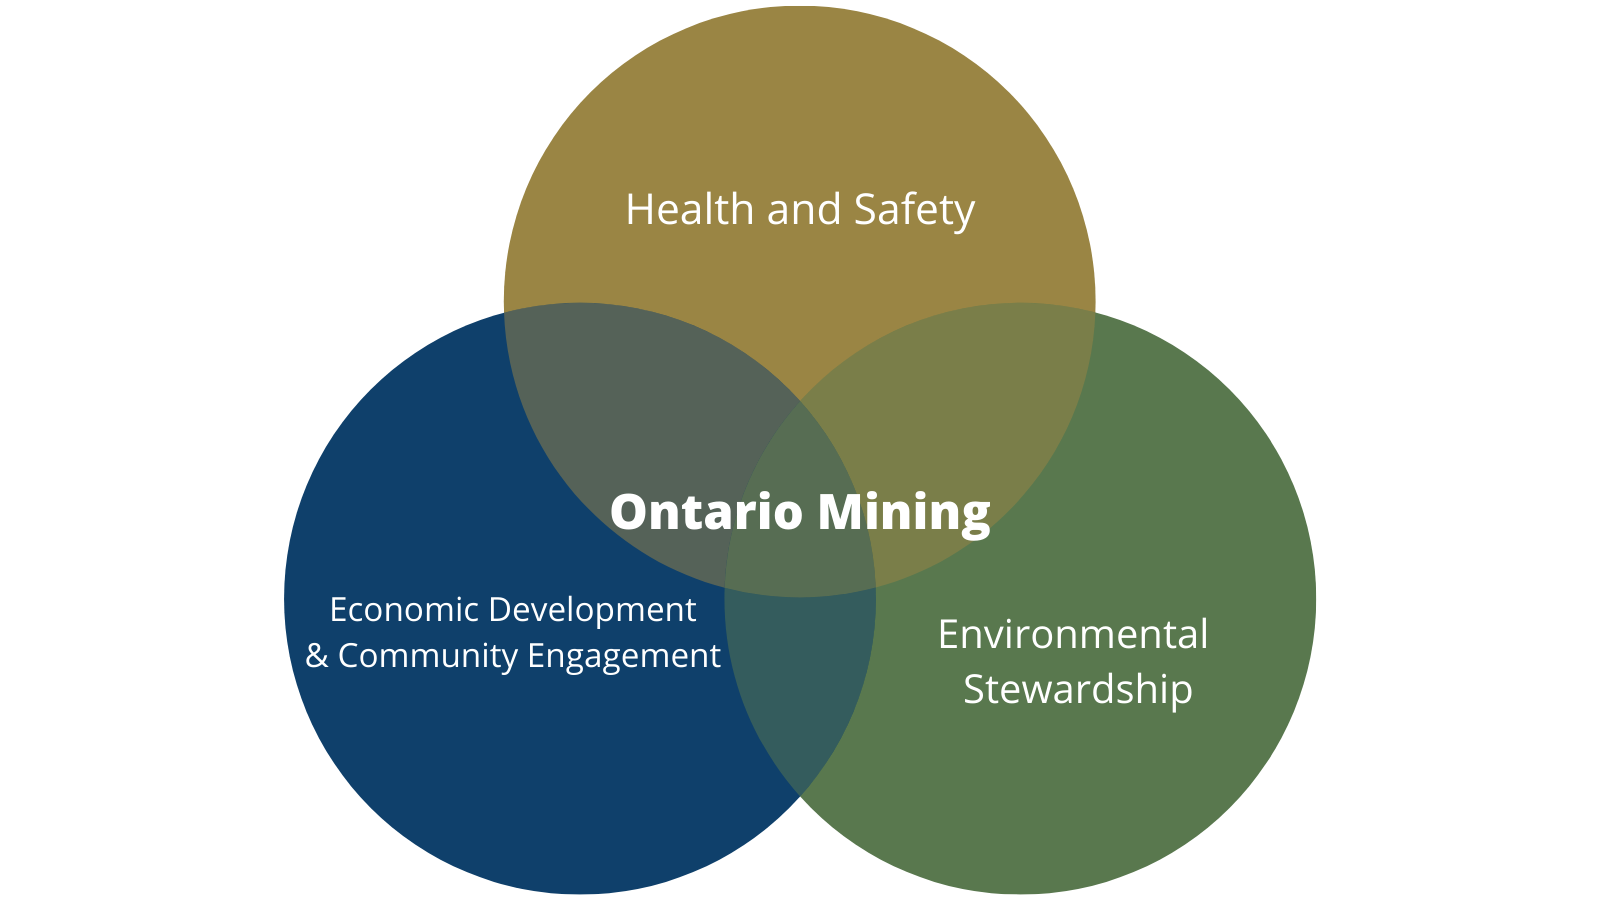 Venn Diagram on Responsible mining - health and safety, economic development and community engagement and environmental stewardship